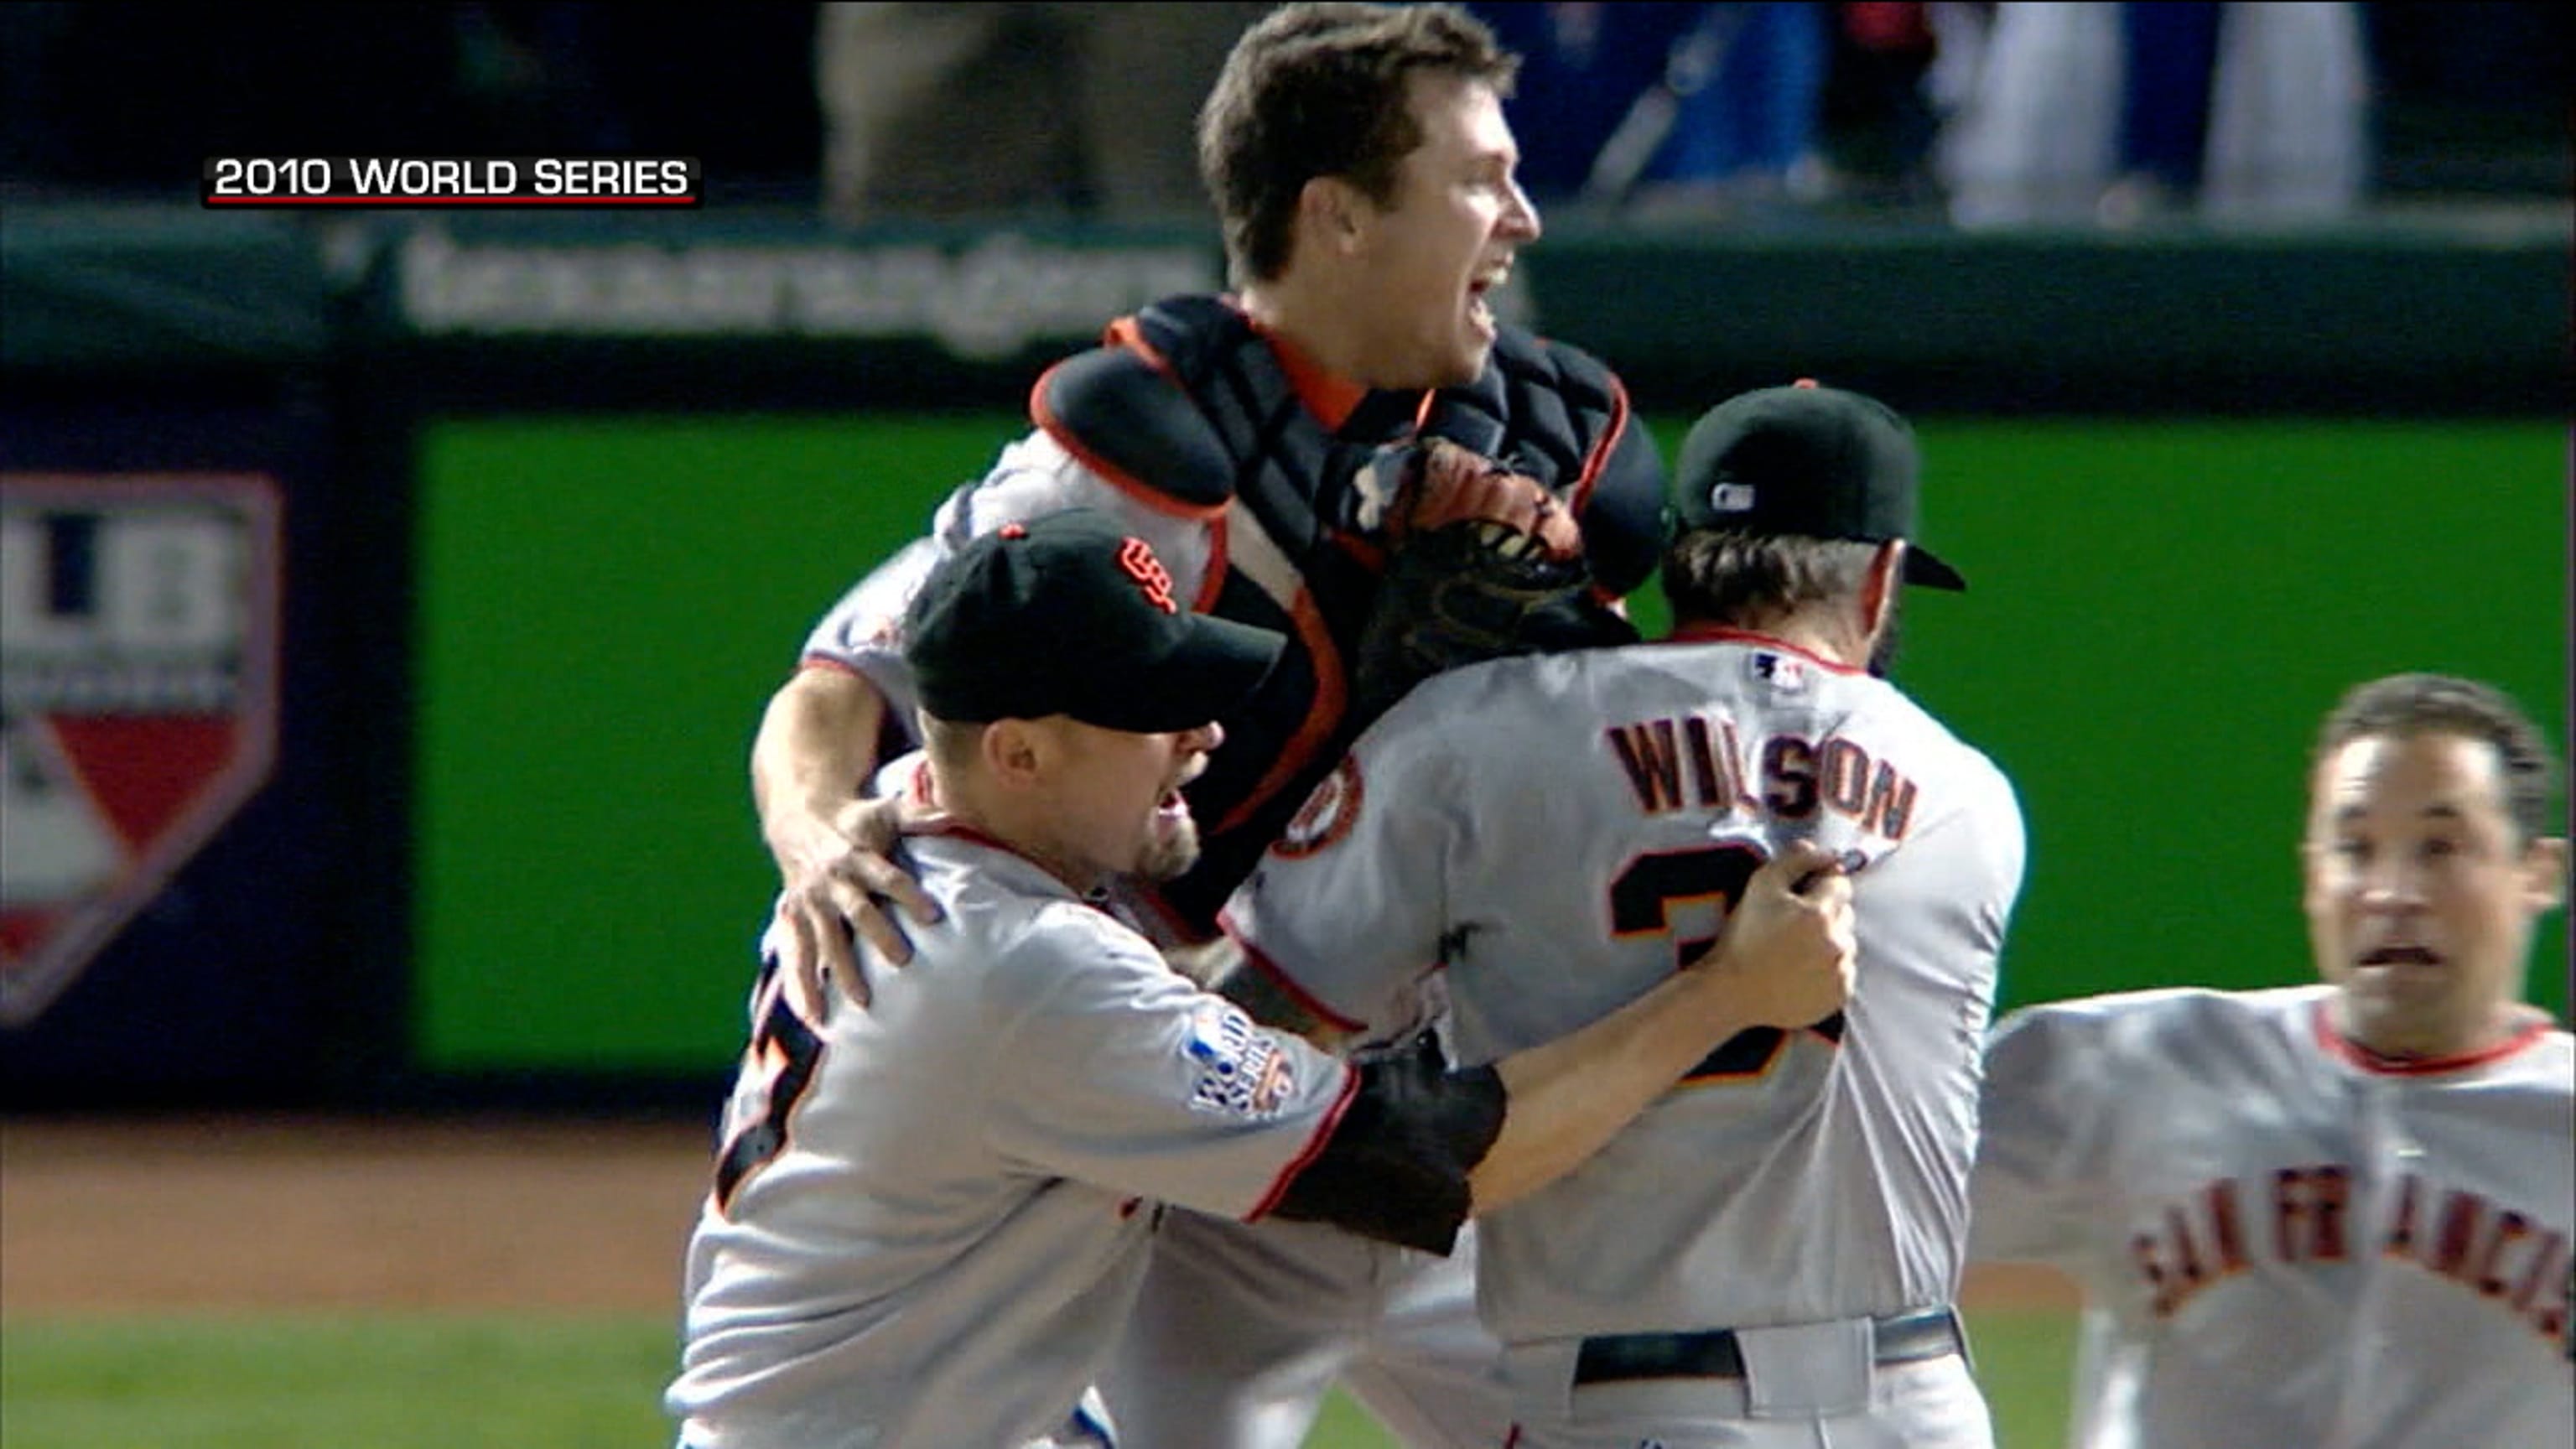 MLB Network - Watch San Francisco Giants icon Buster Posey